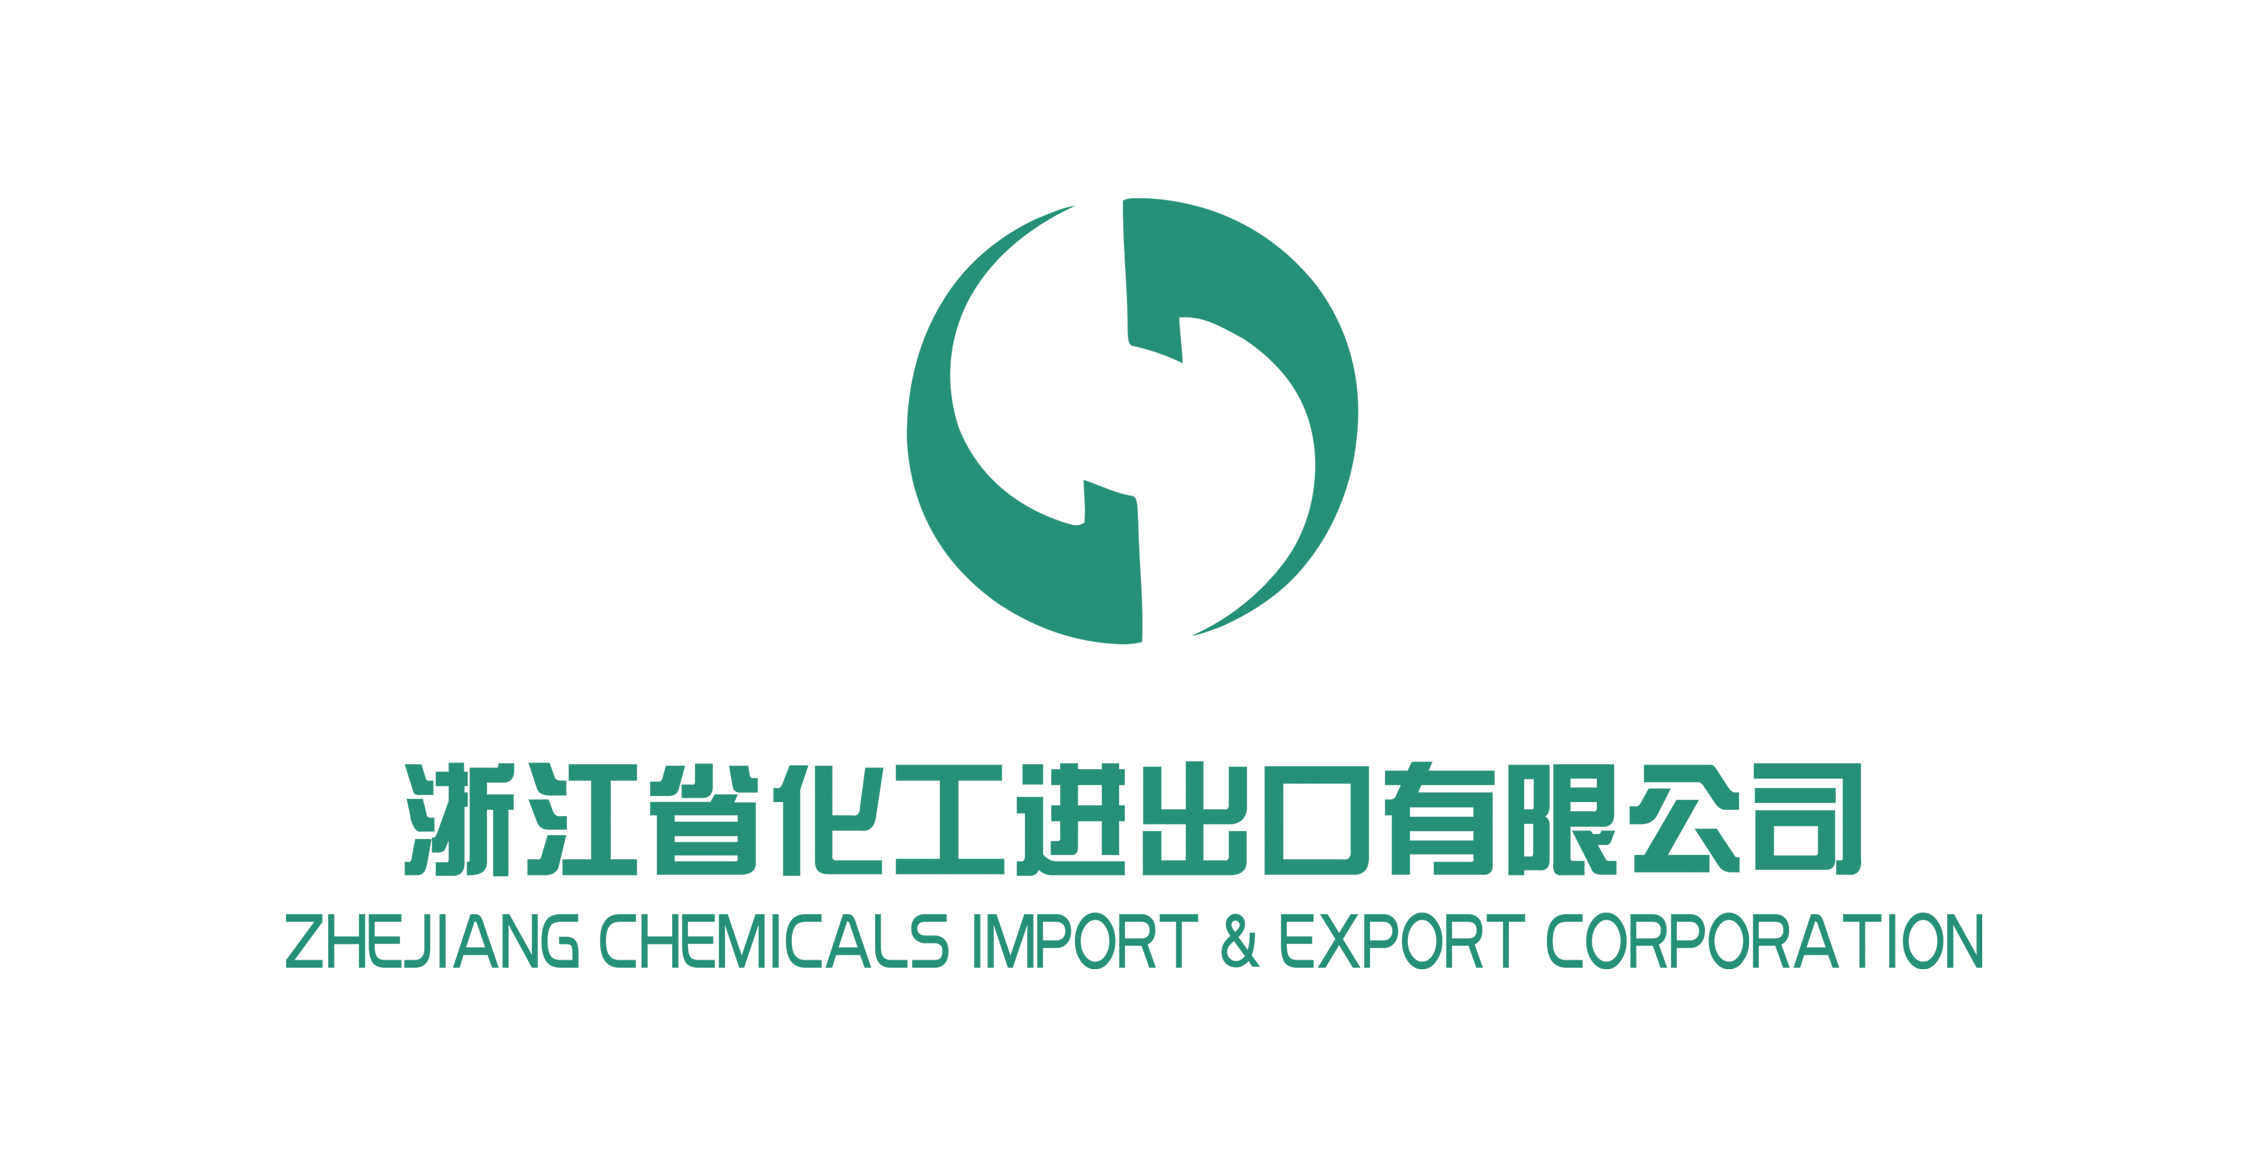 ZHEJIANG CHEMICALS IMPORT AND EXPORT CORPORATION.